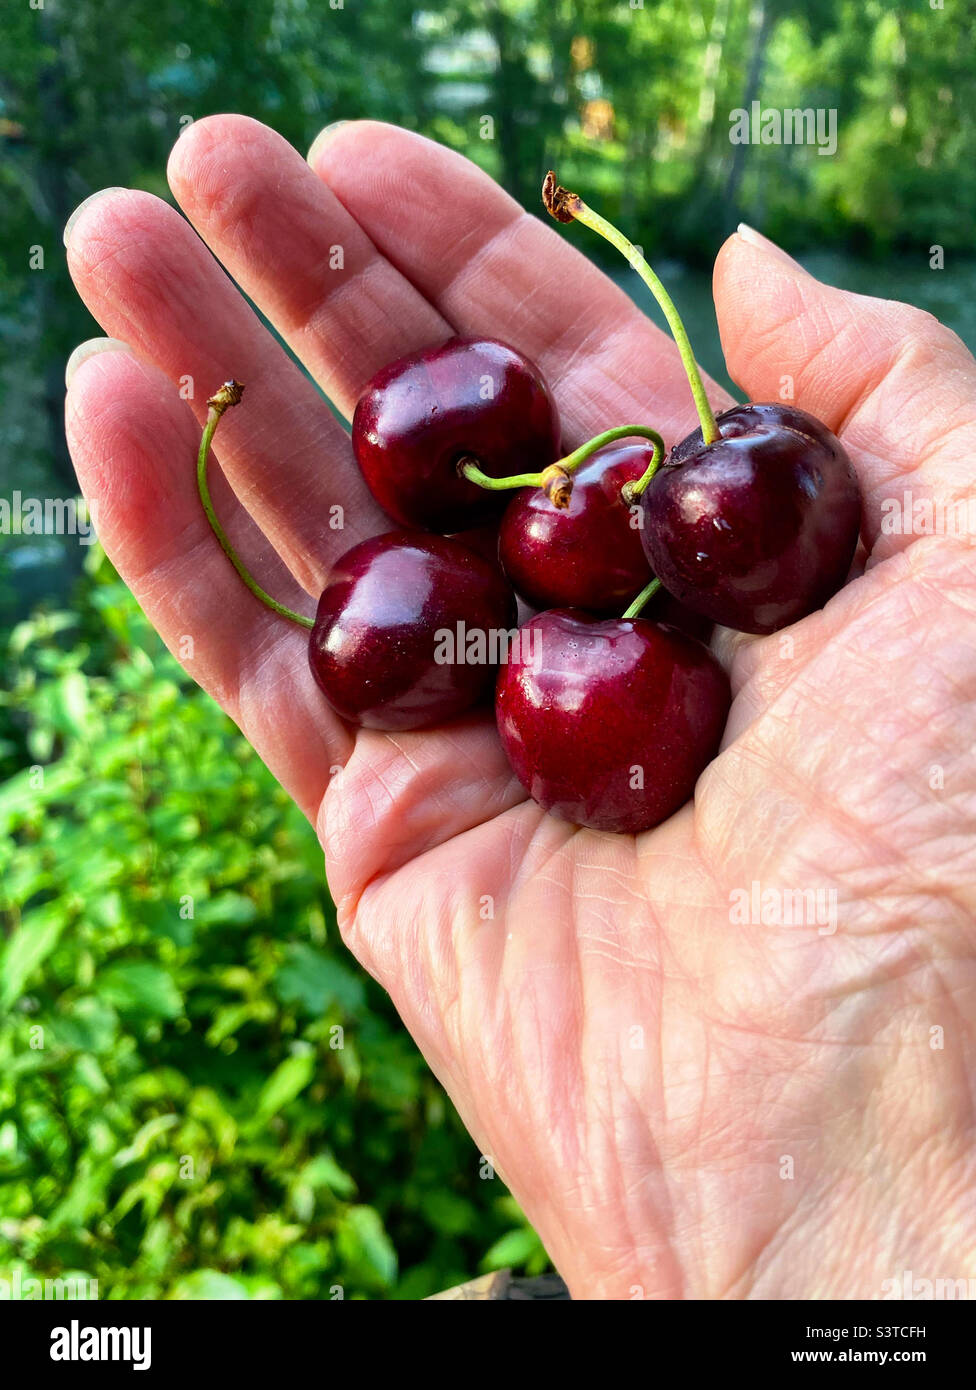 Sweet cherries in a man’s hand Stock Photo